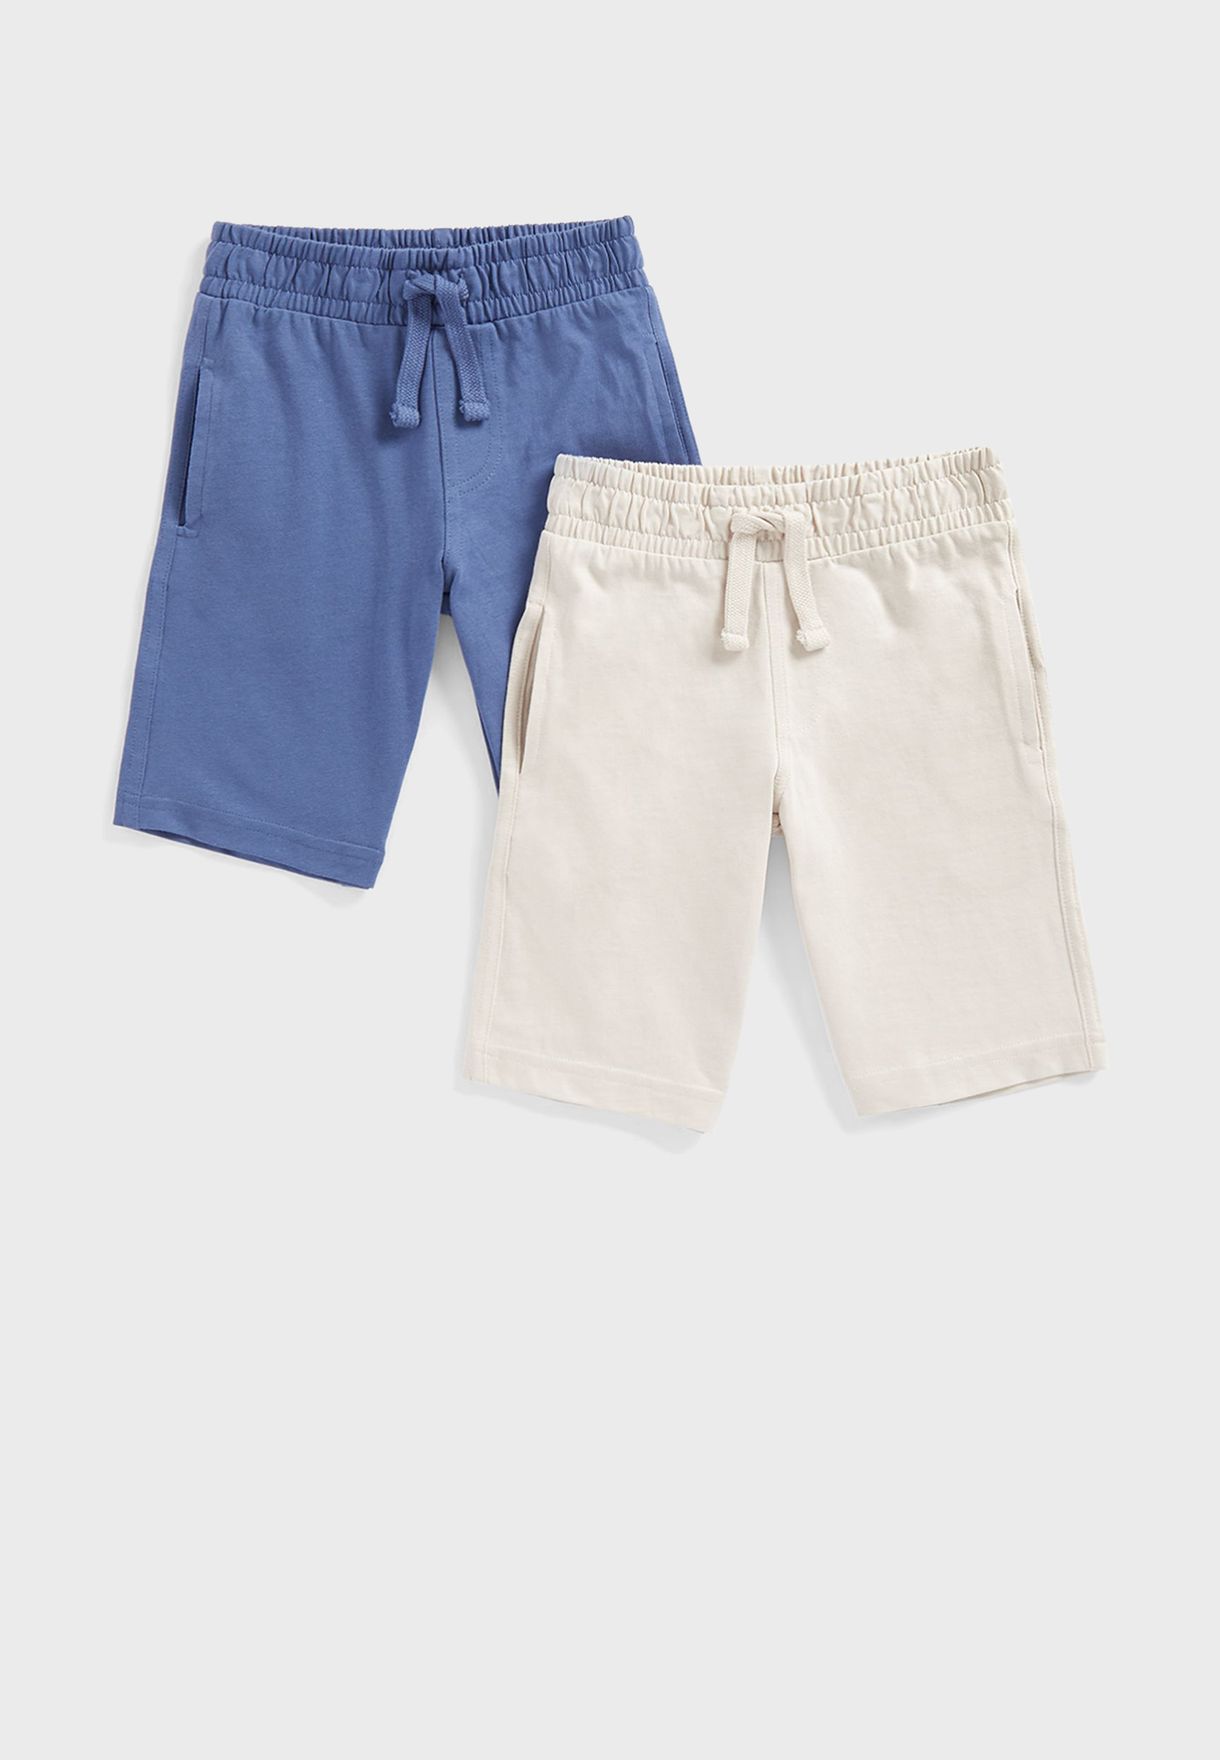 Kids 2 Pack Assorted Shorts